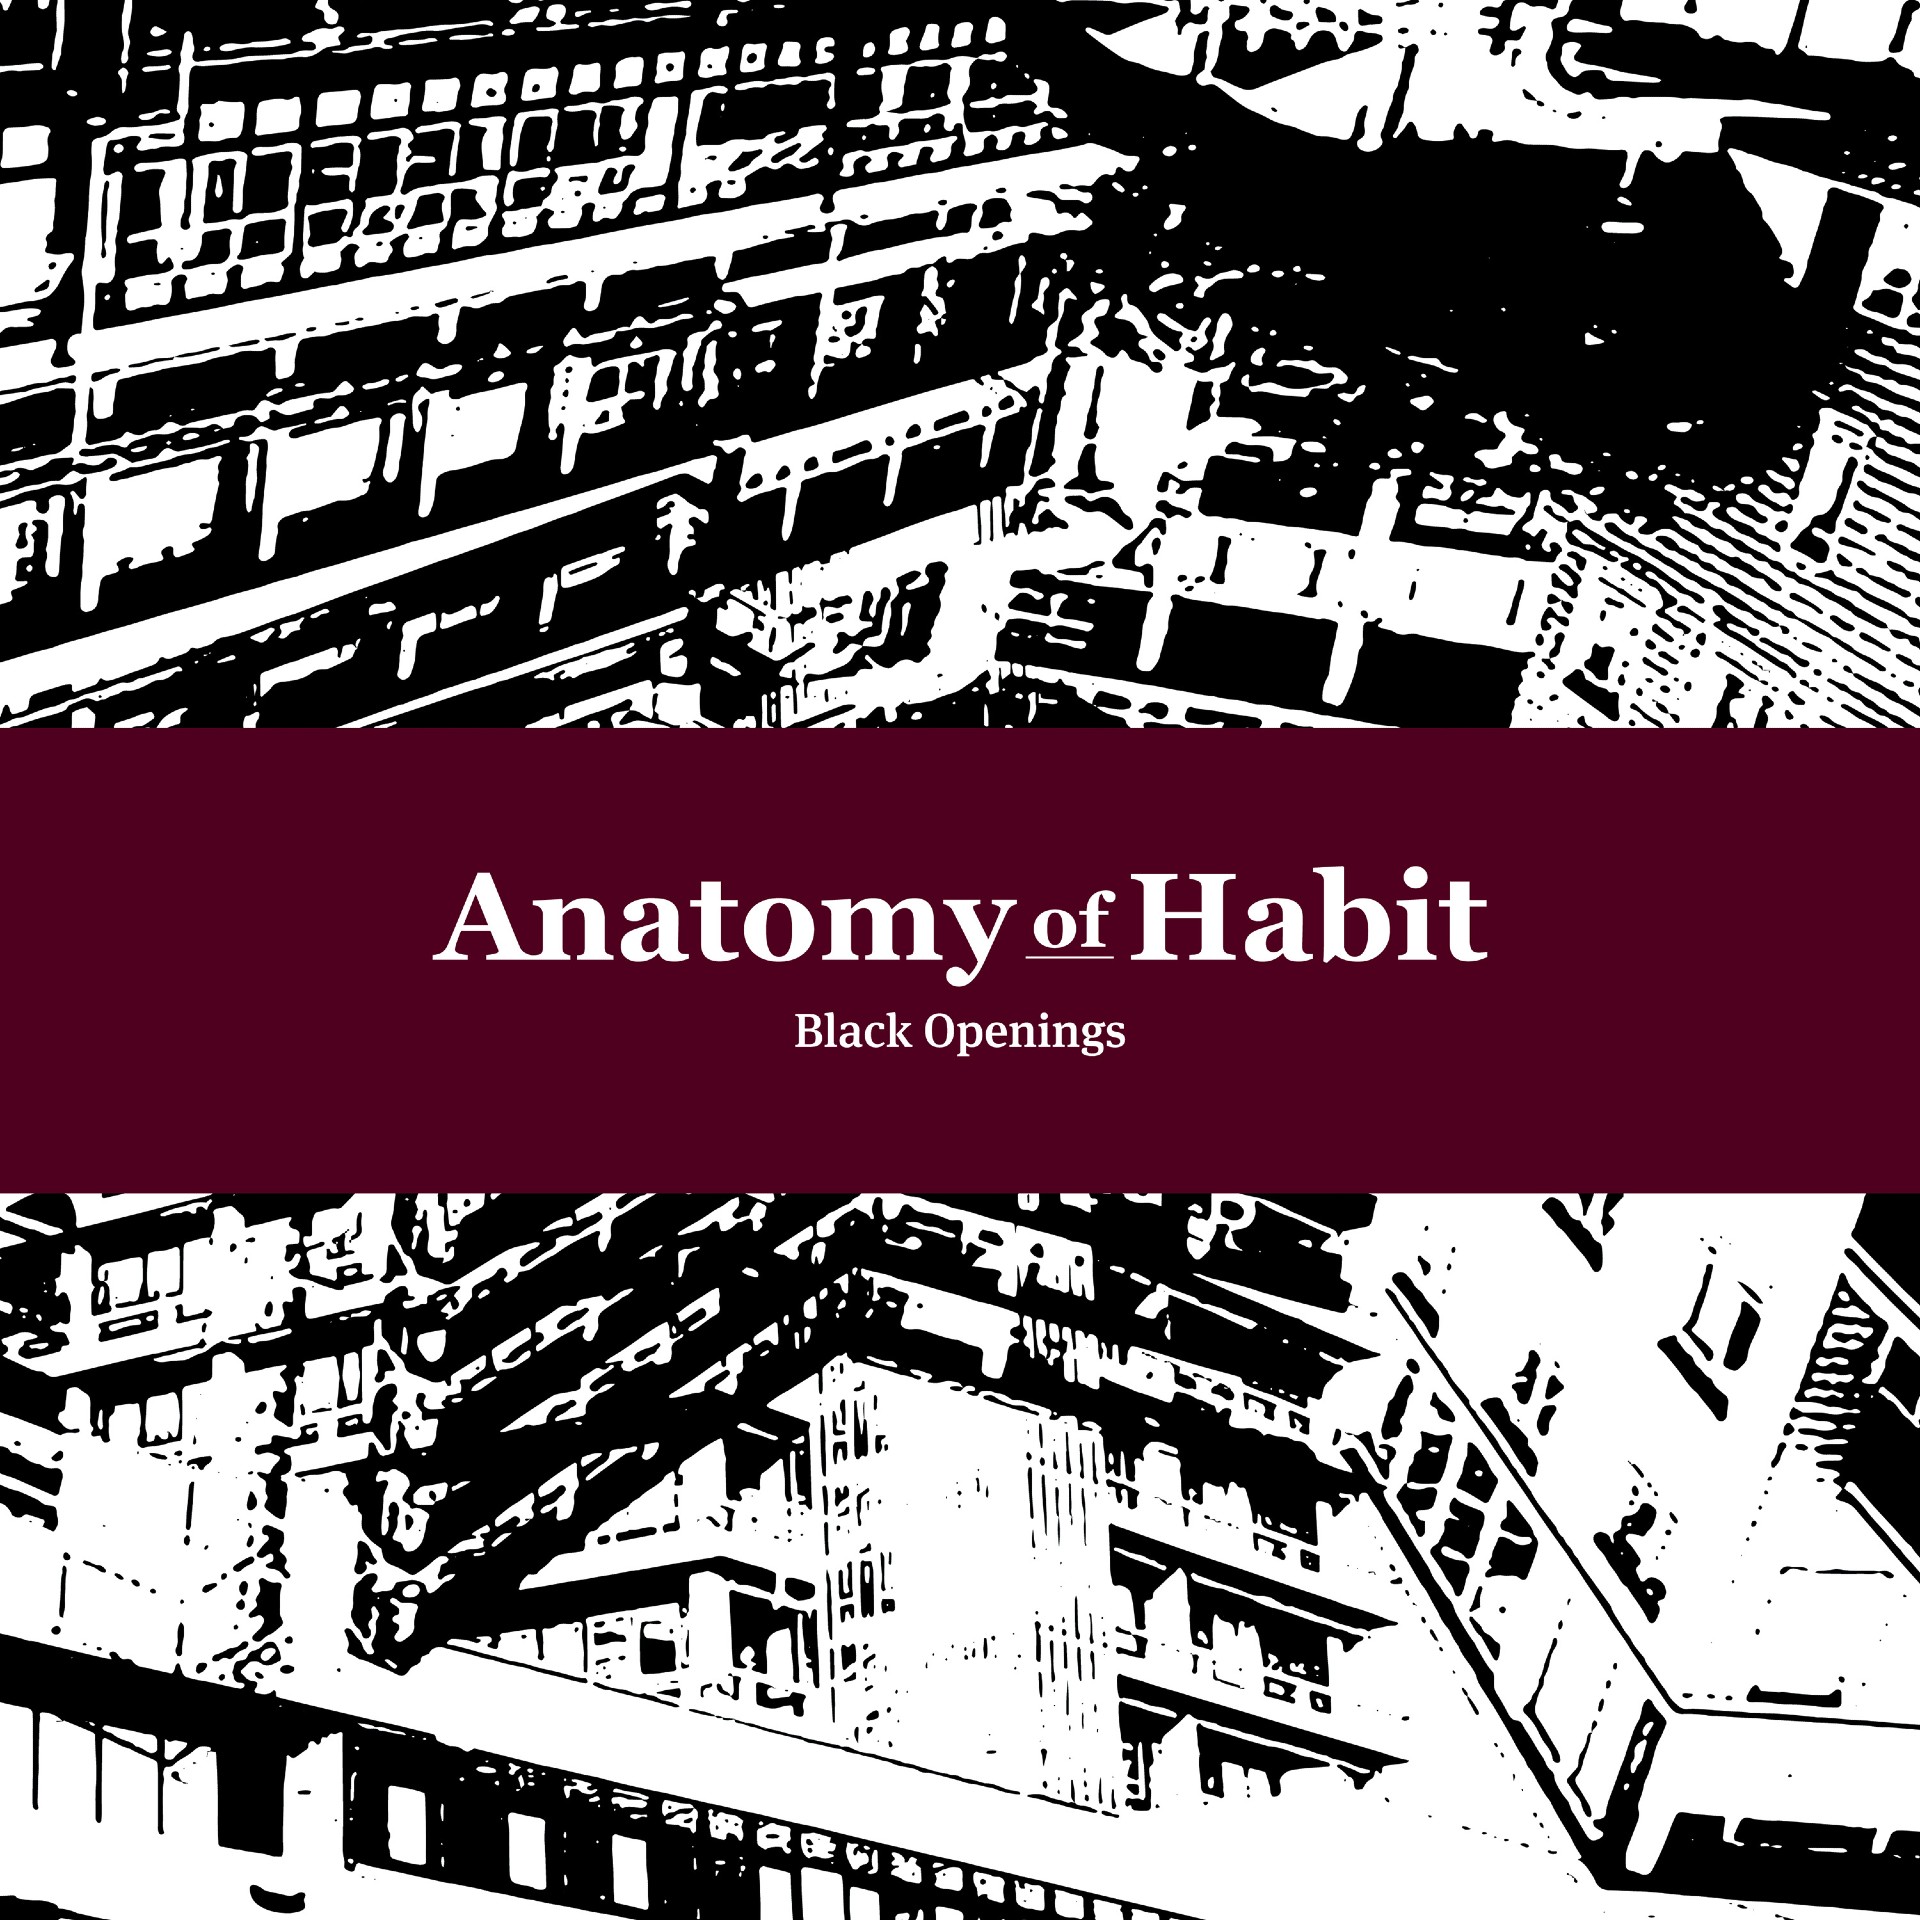 Artwork for the album ‘Black Openings’ by Anatomy of Habit